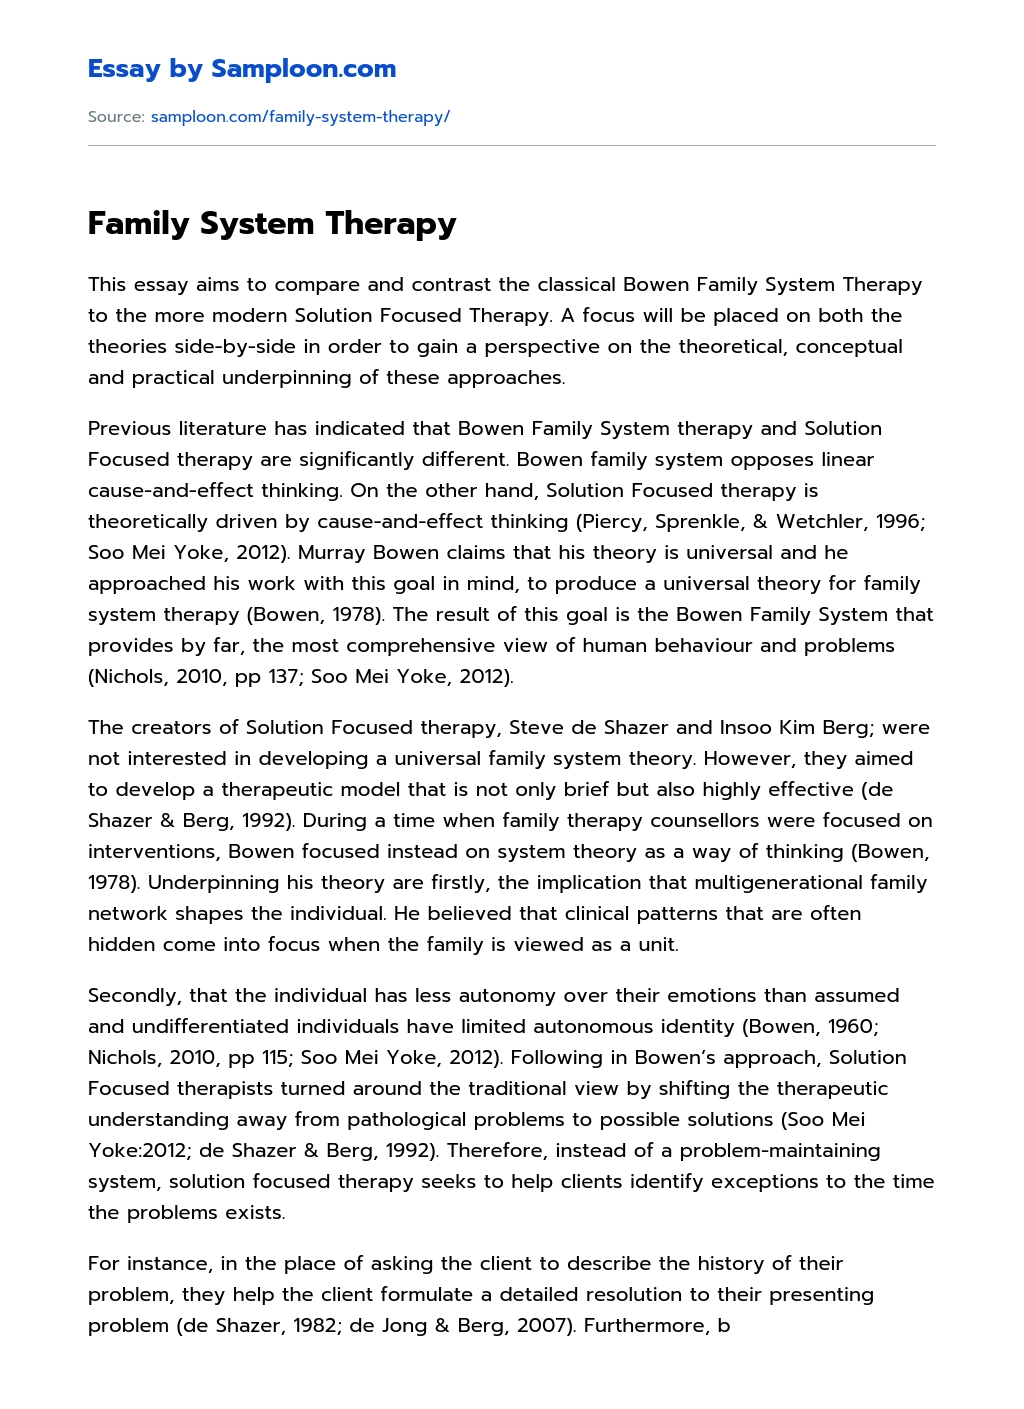 Family System Therapy essay